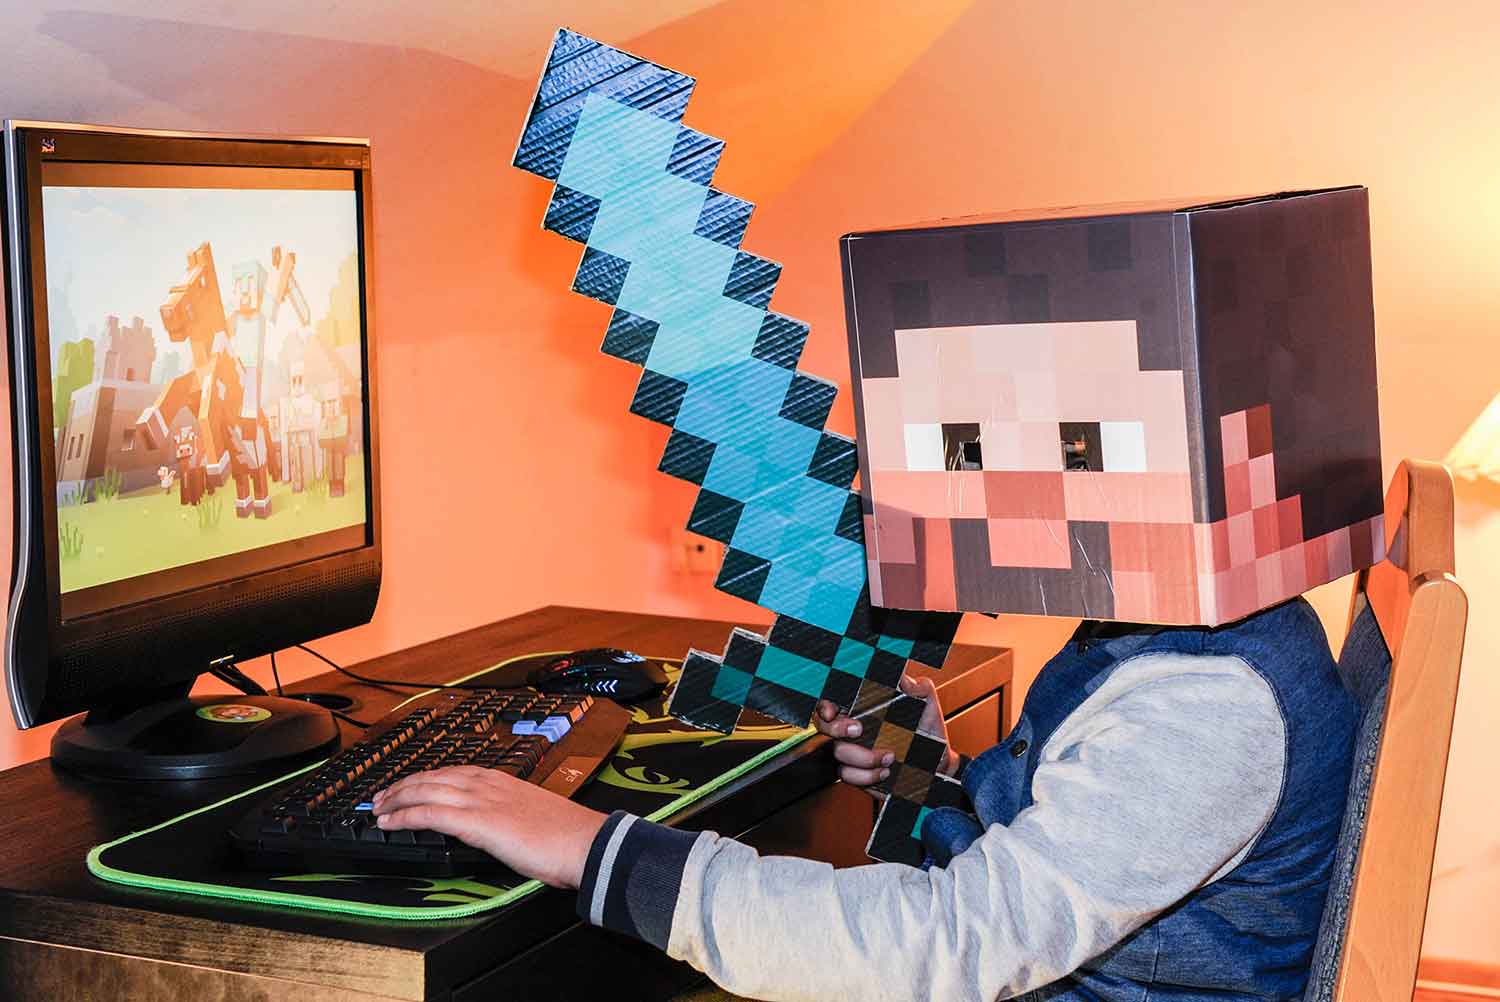 A Minecraft kid sits at a computer playing Minecraft.